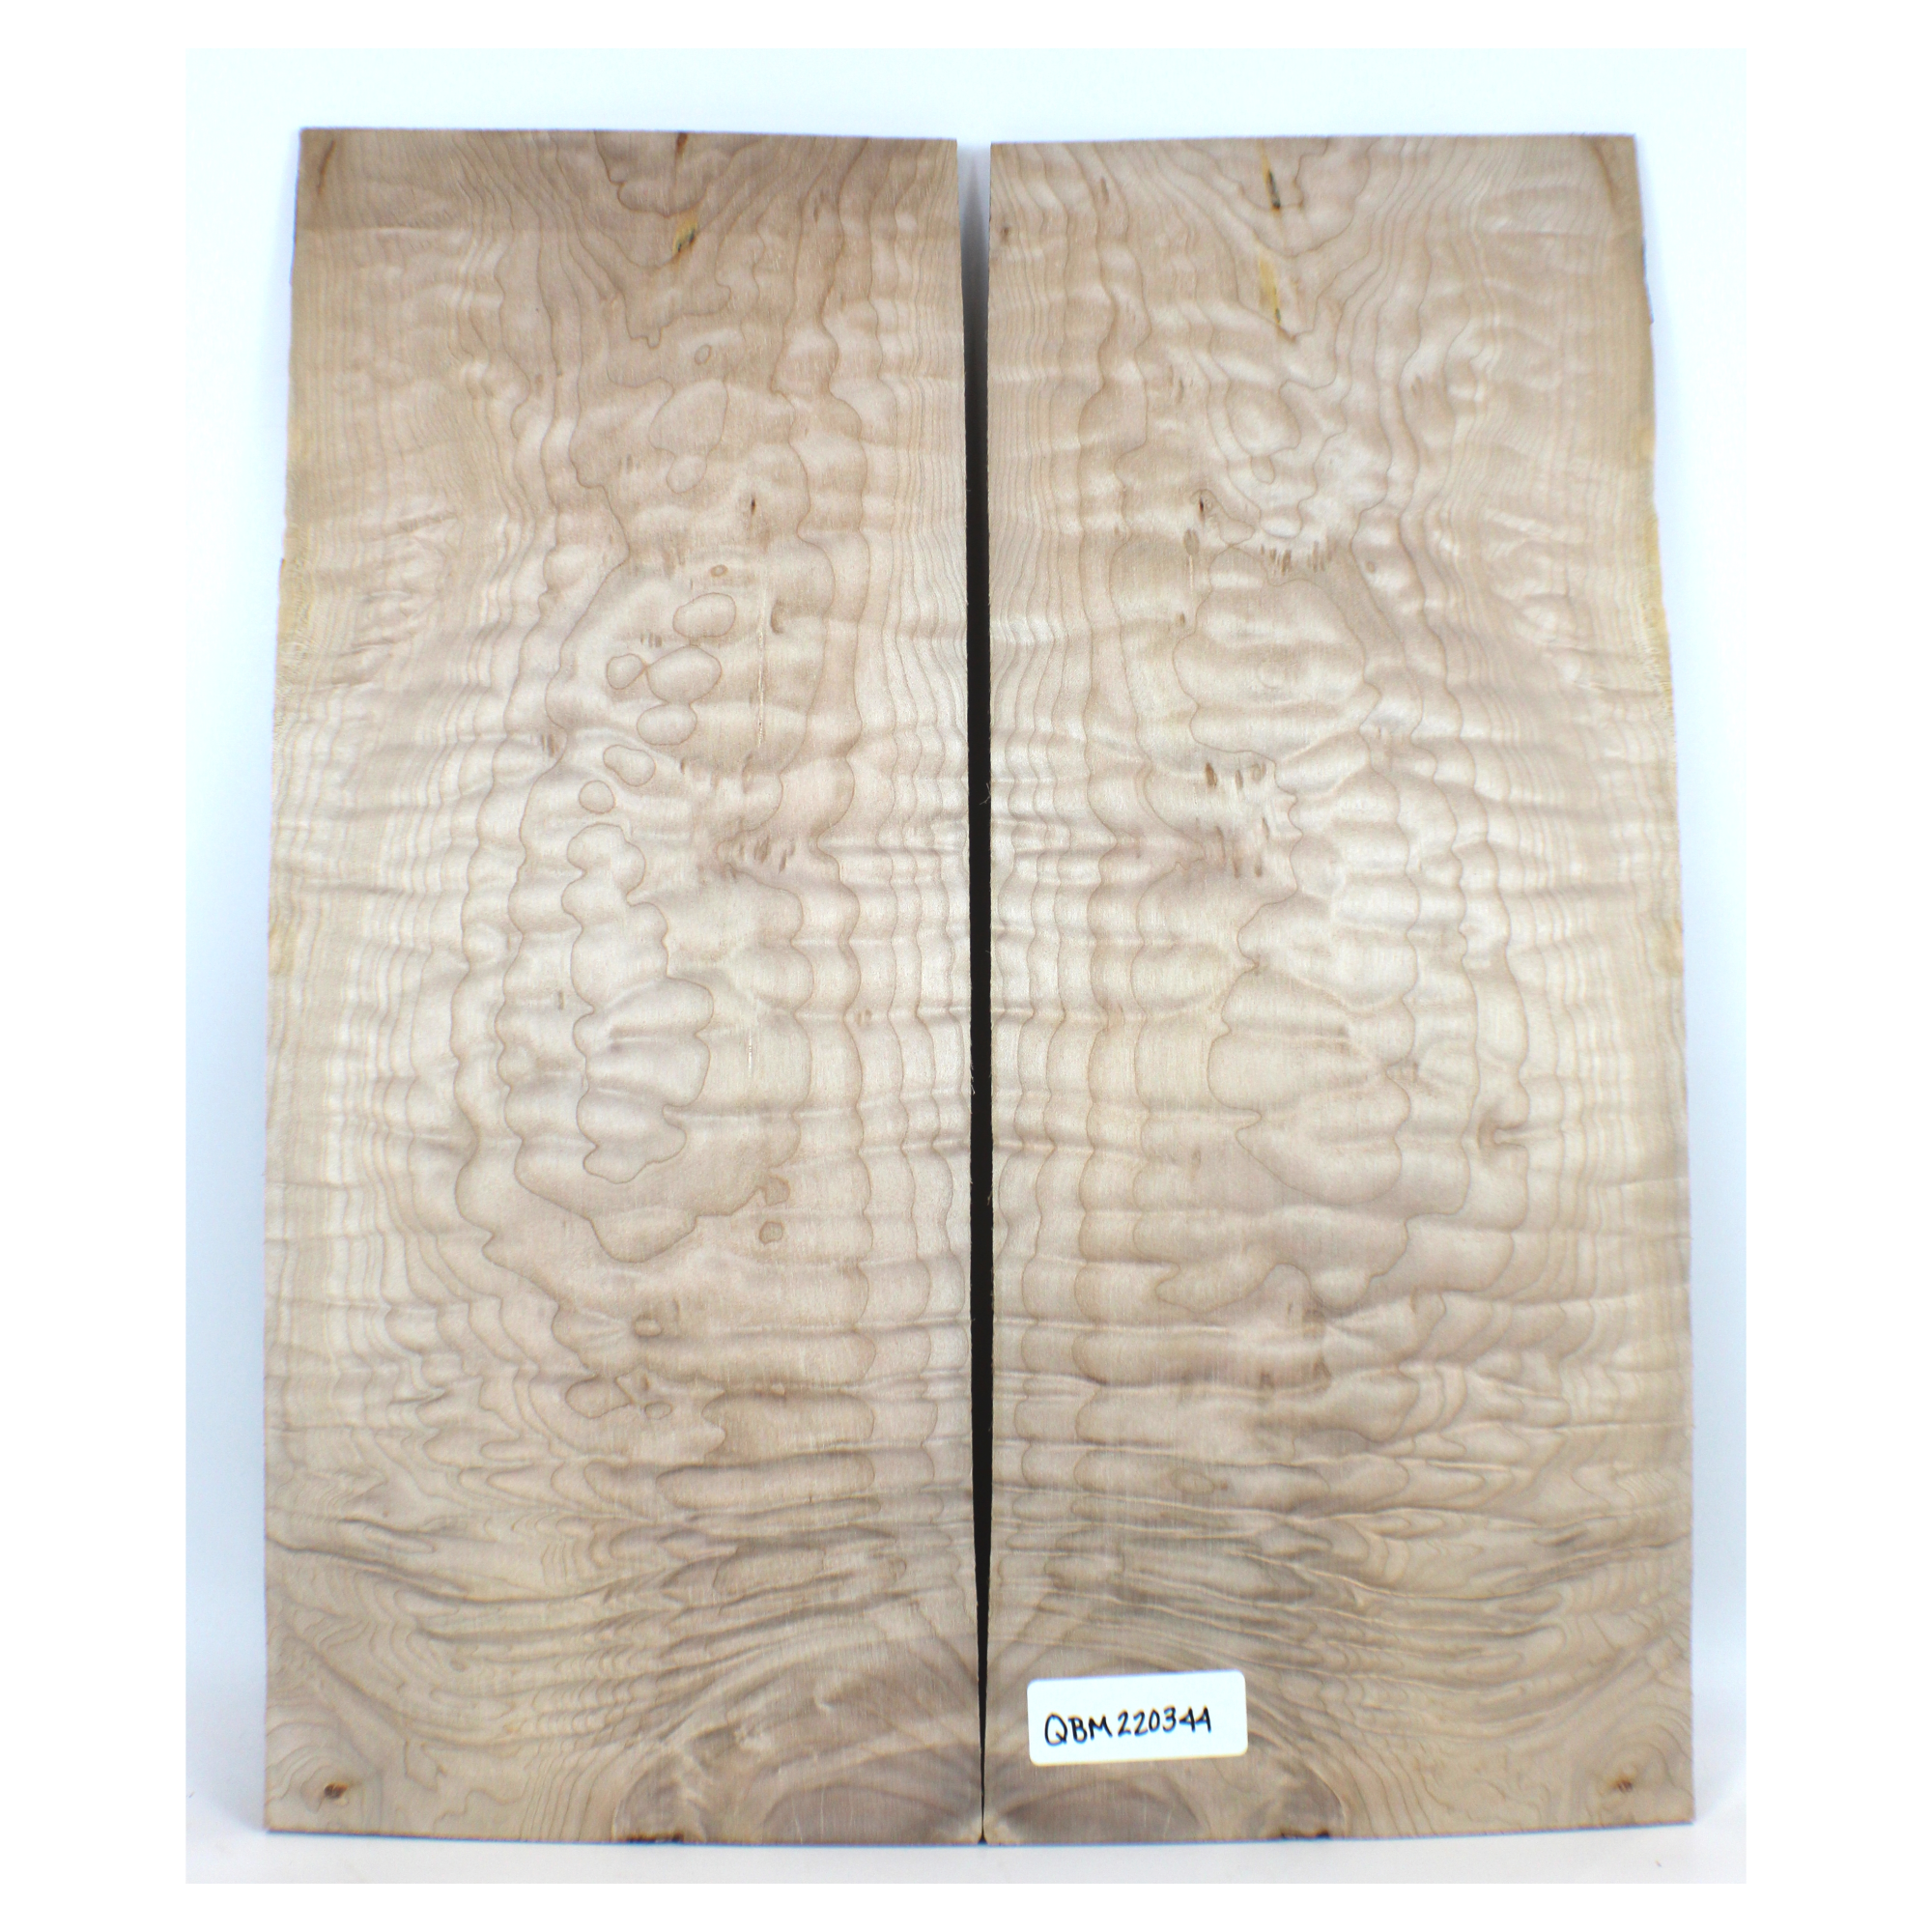 2-piece quilted maple book-matched set with 4A figure and really interesting grain patterning.  There are cambium inclusions and some face checking in this set.  It has been sanded to 400 grit.  Dimensions: Thickness (each piece): .25